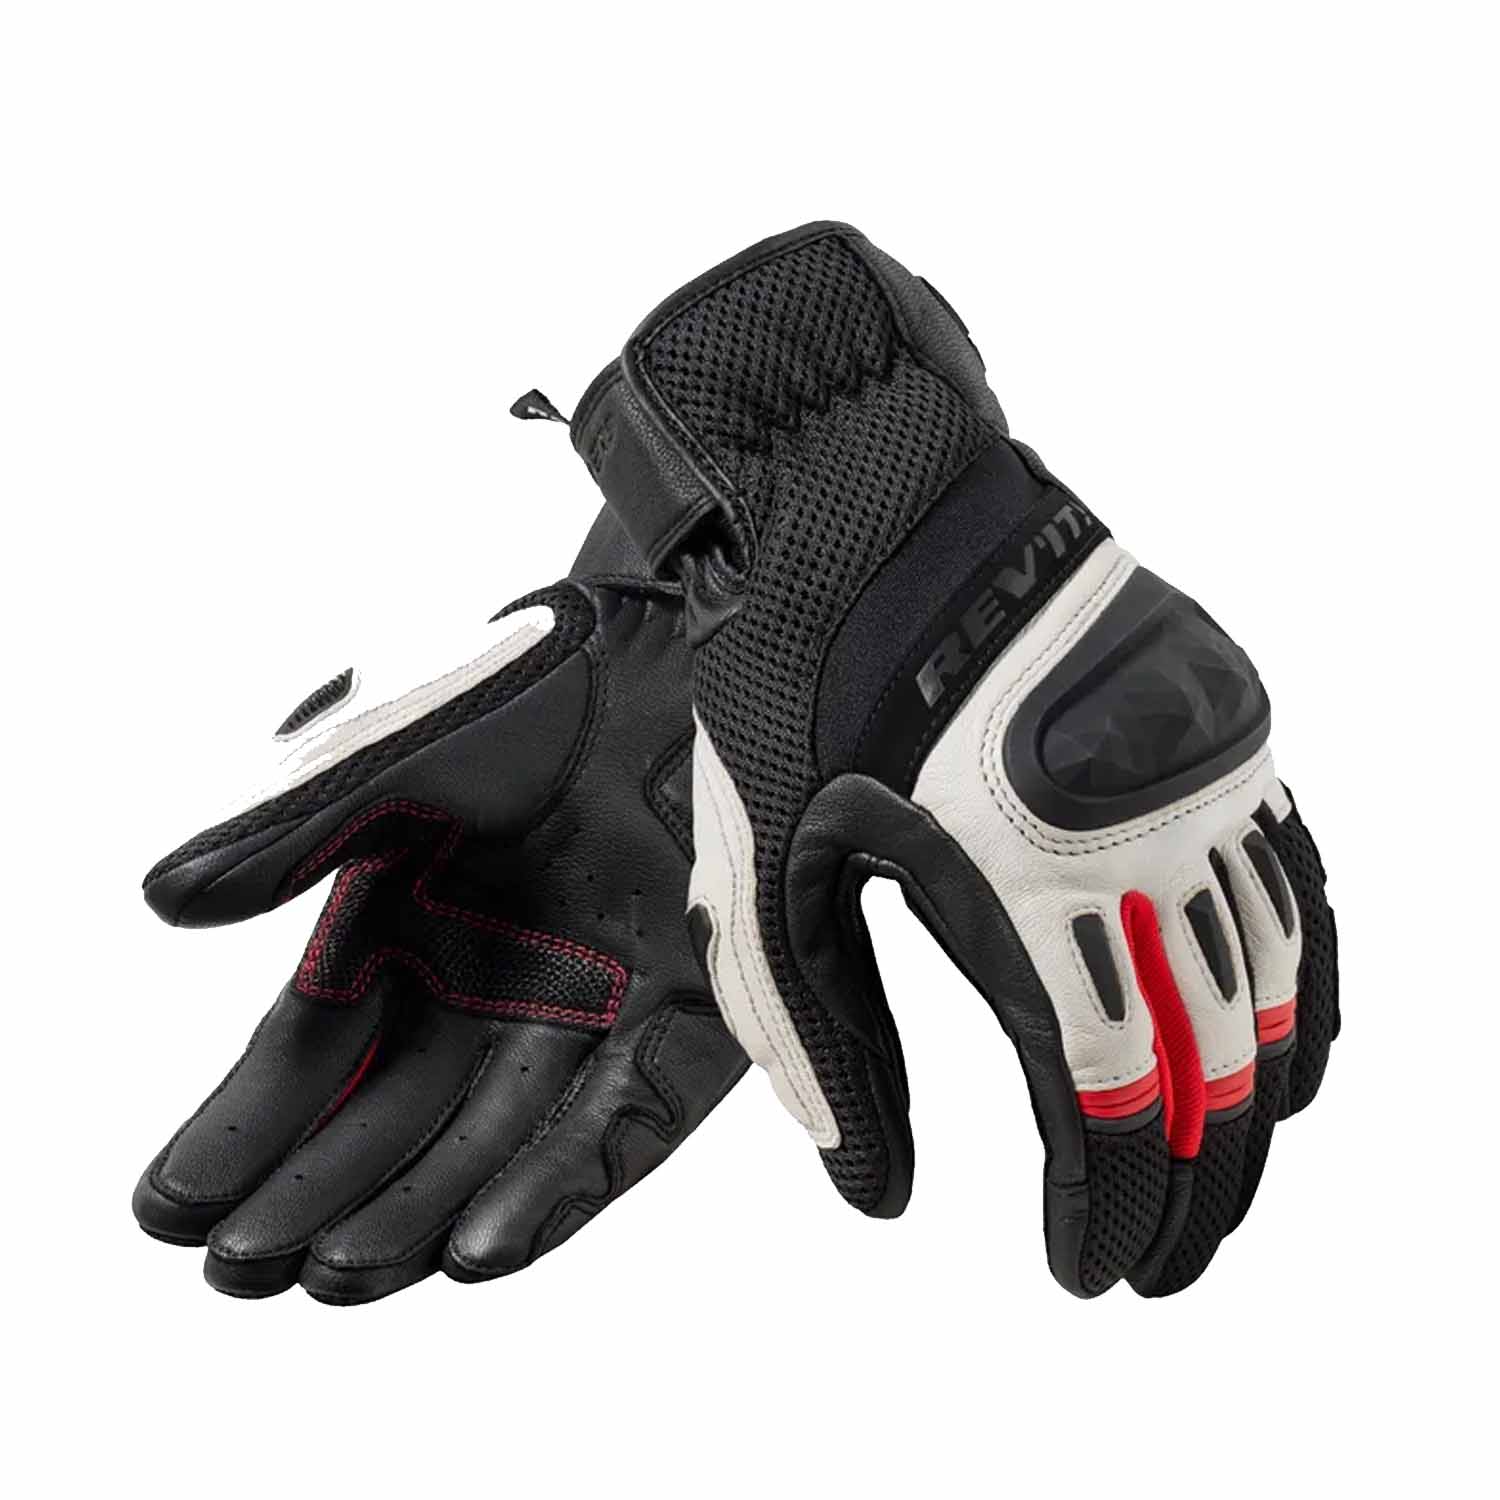 Image of REV'IT! Dirt 4 Gloves Black Red Size XL ID 8700001383486